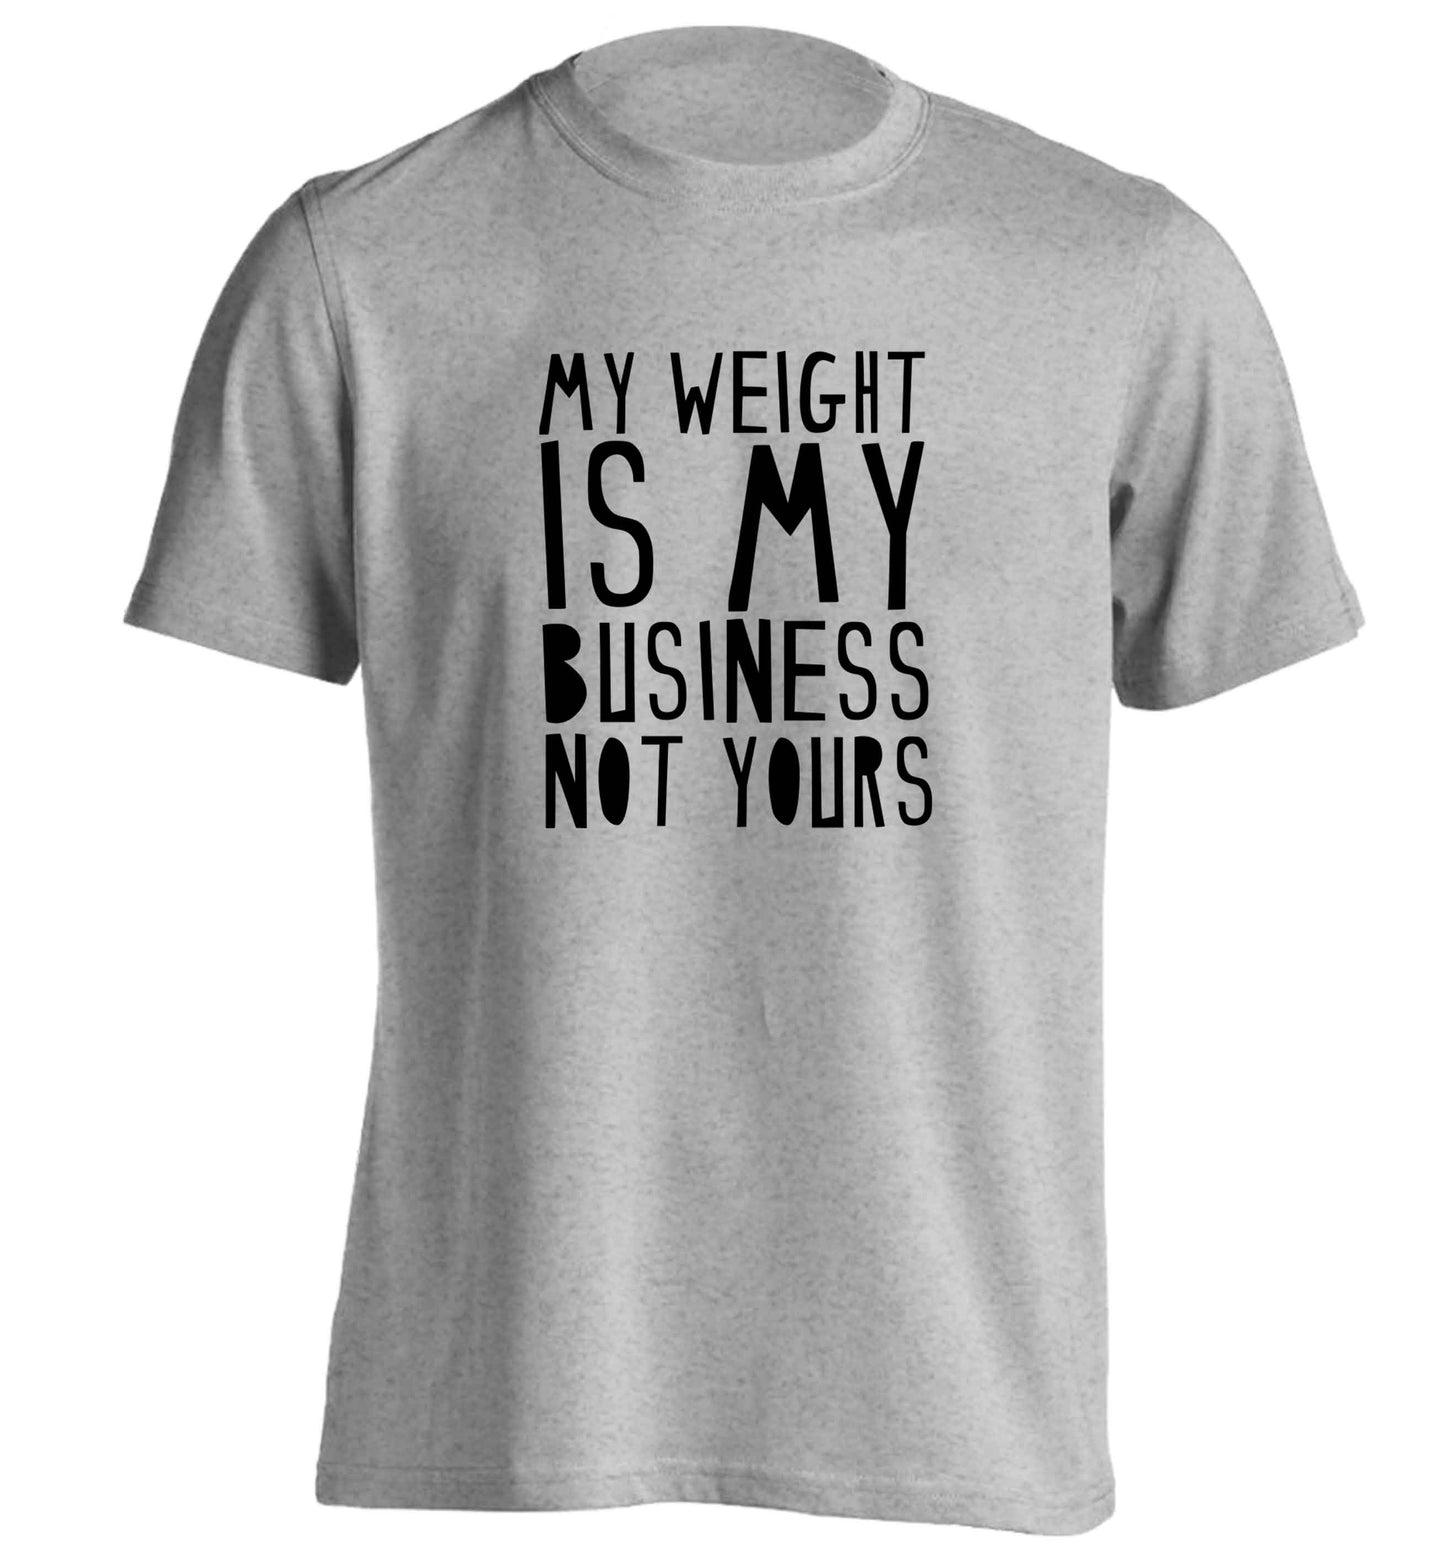 My weight is my business not yours adults unisex grey Tshirt 2XL